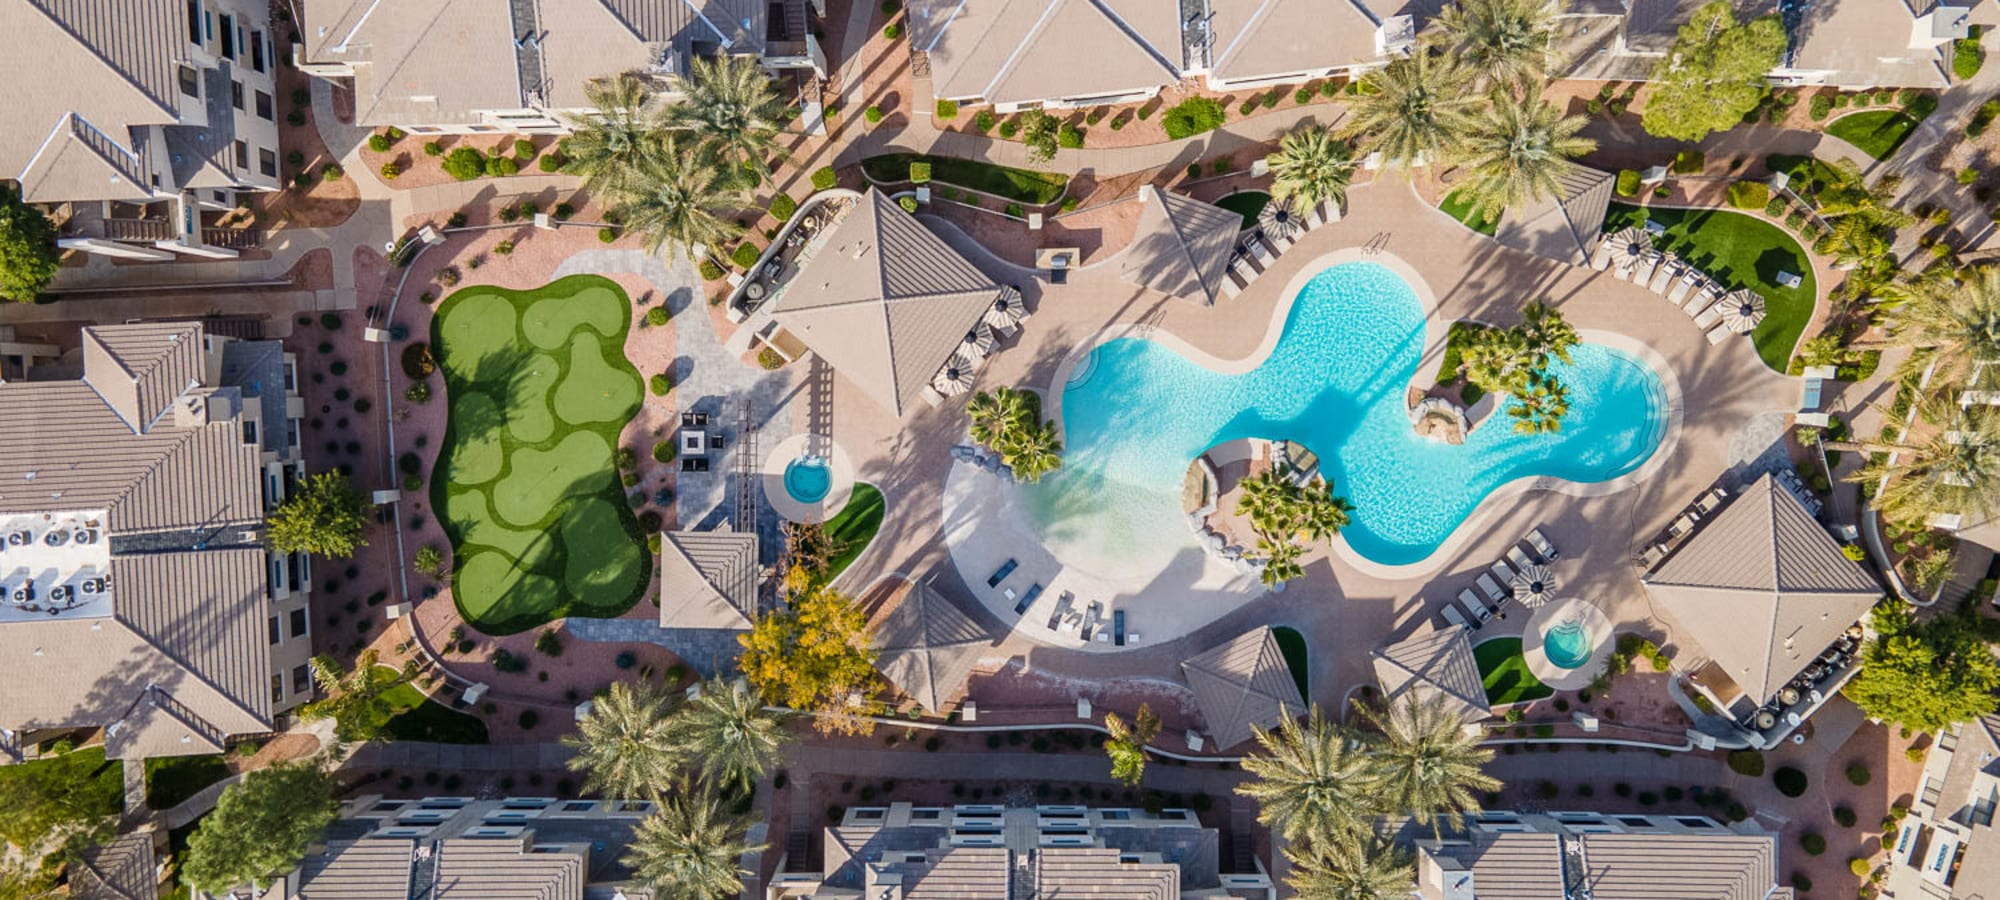 Aerial community view at Ascend at Kierland in Scottsdale, Arizona